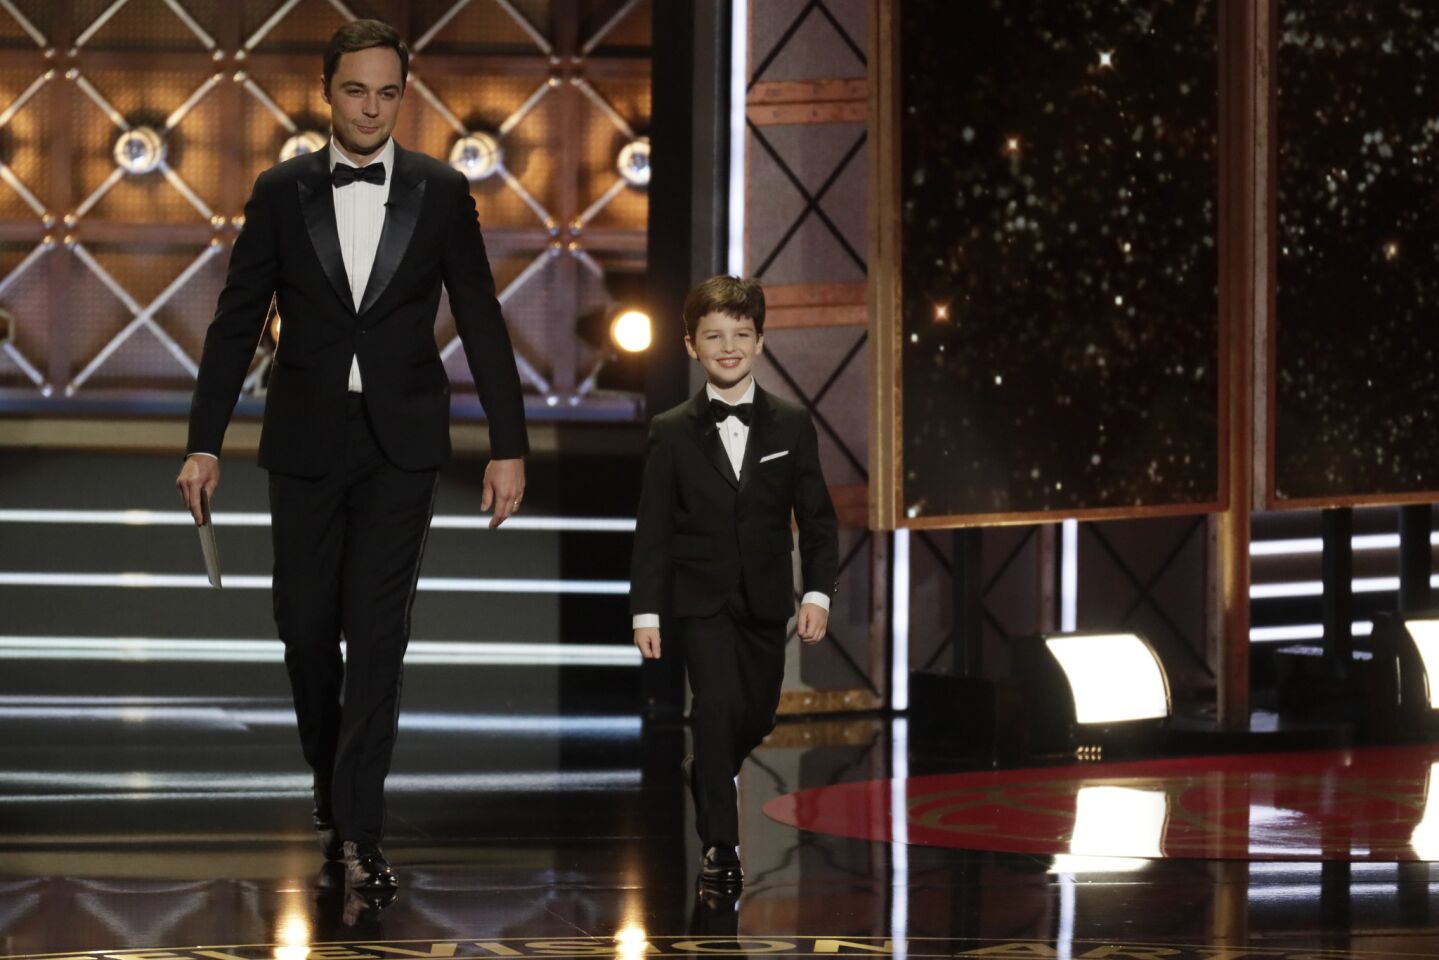 "Big Bang Theory" actor Jim Parsons and "Young Sheldon" actor Iain Armitage during the show.